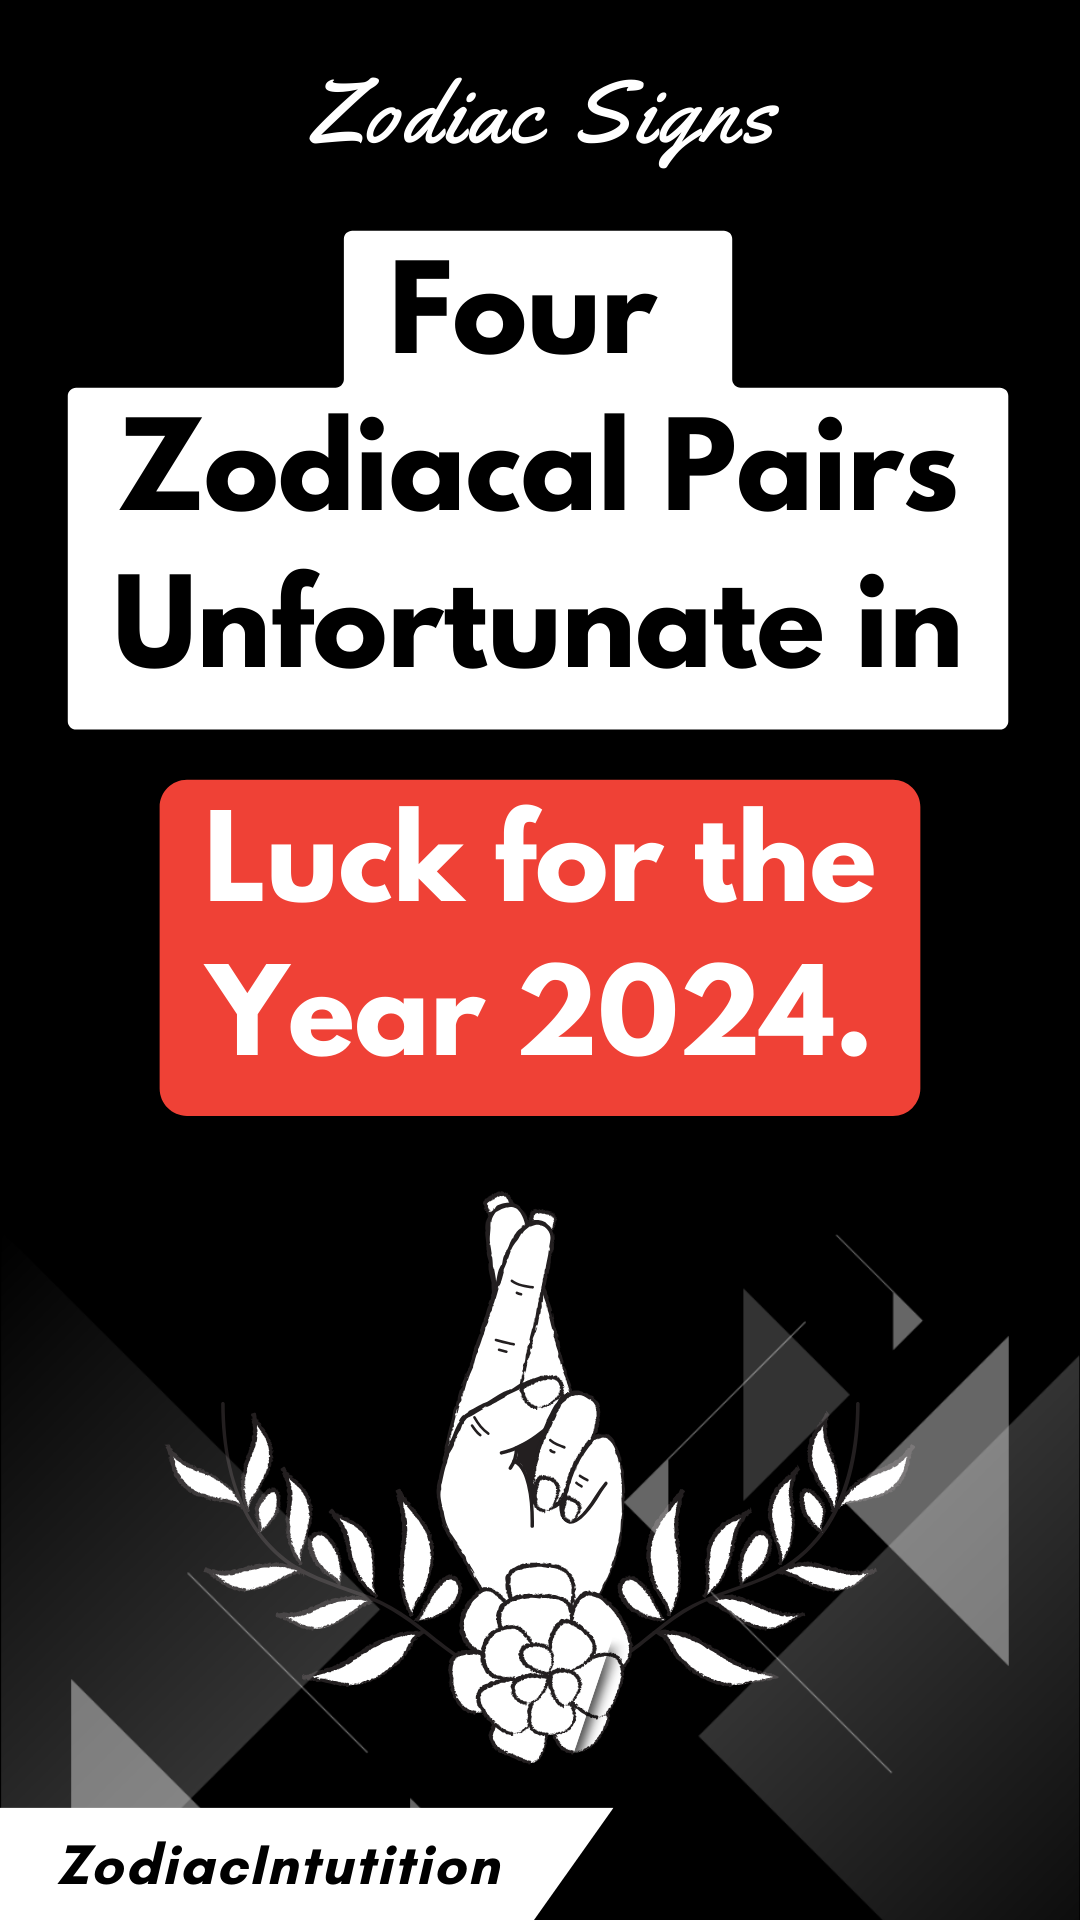 Four Zodiacal Pairs Unfortunate in Luck for the Year 2024.